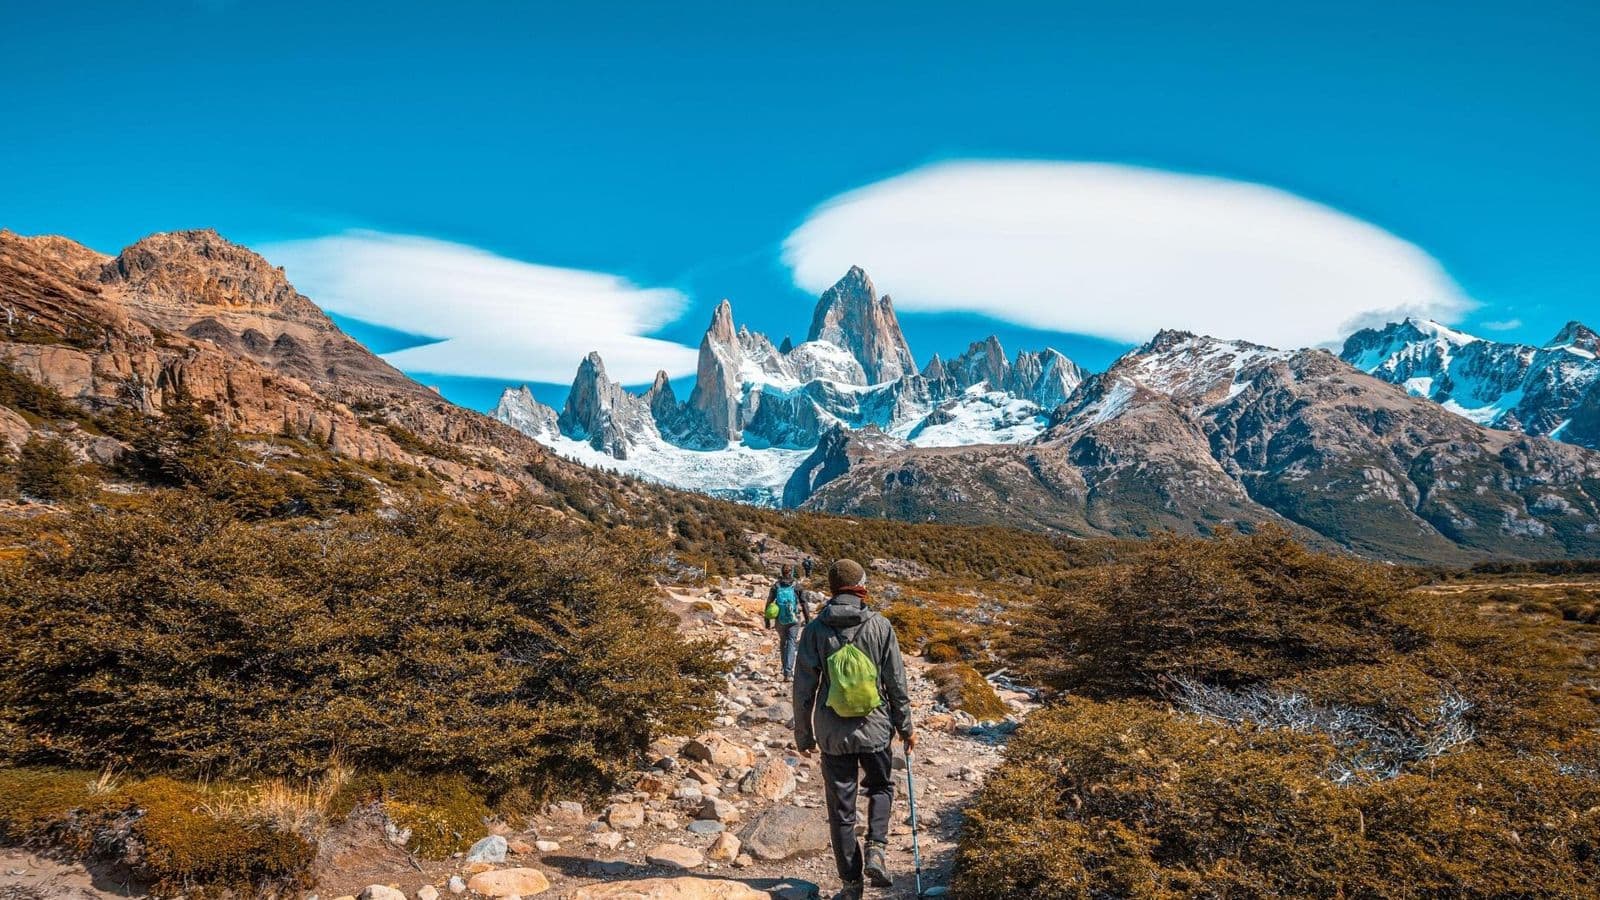 Enjoy Patagonia's glaciers and starry nights with these recommendations